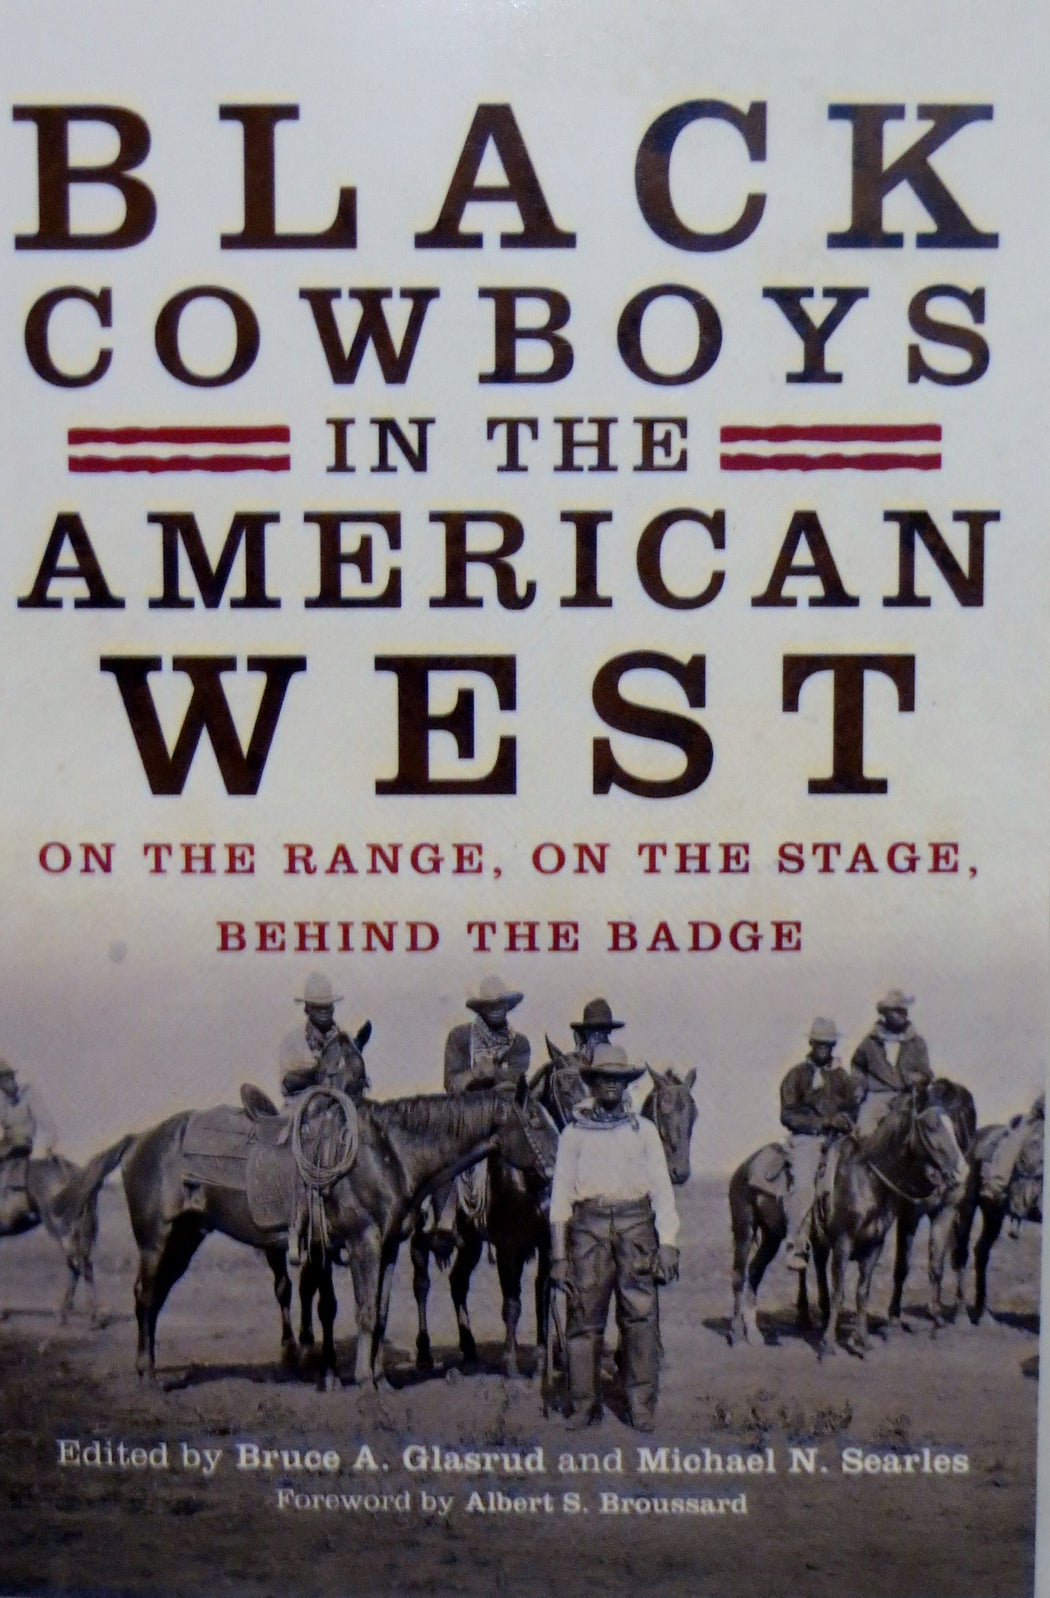 Black Cowboys in the American West